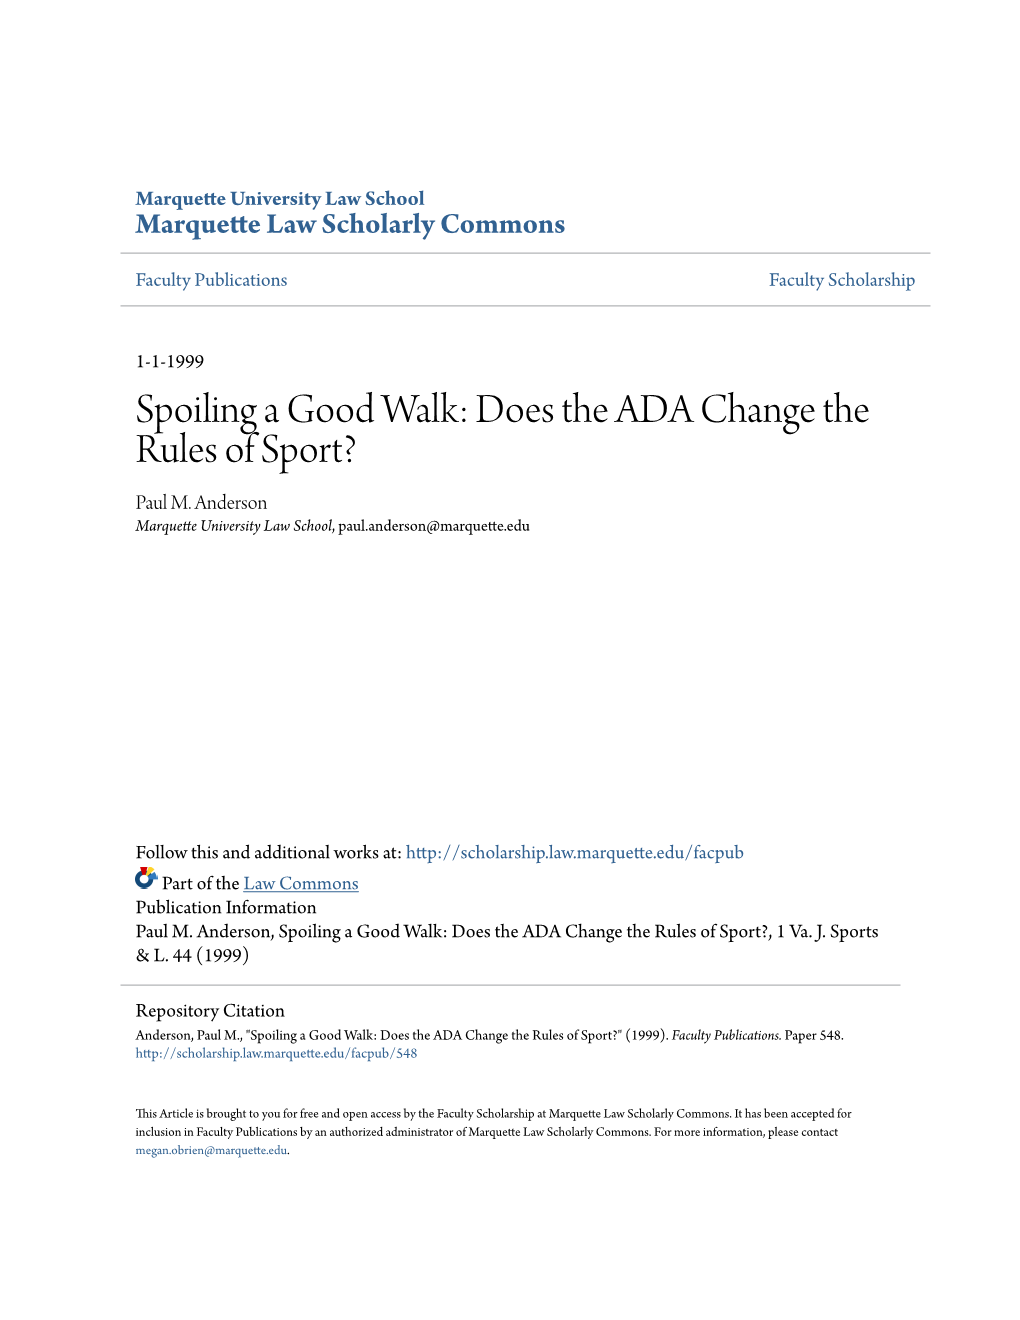 Spoiling a Good Walk: Does the ADA Change the Rules of Sport? Paul M